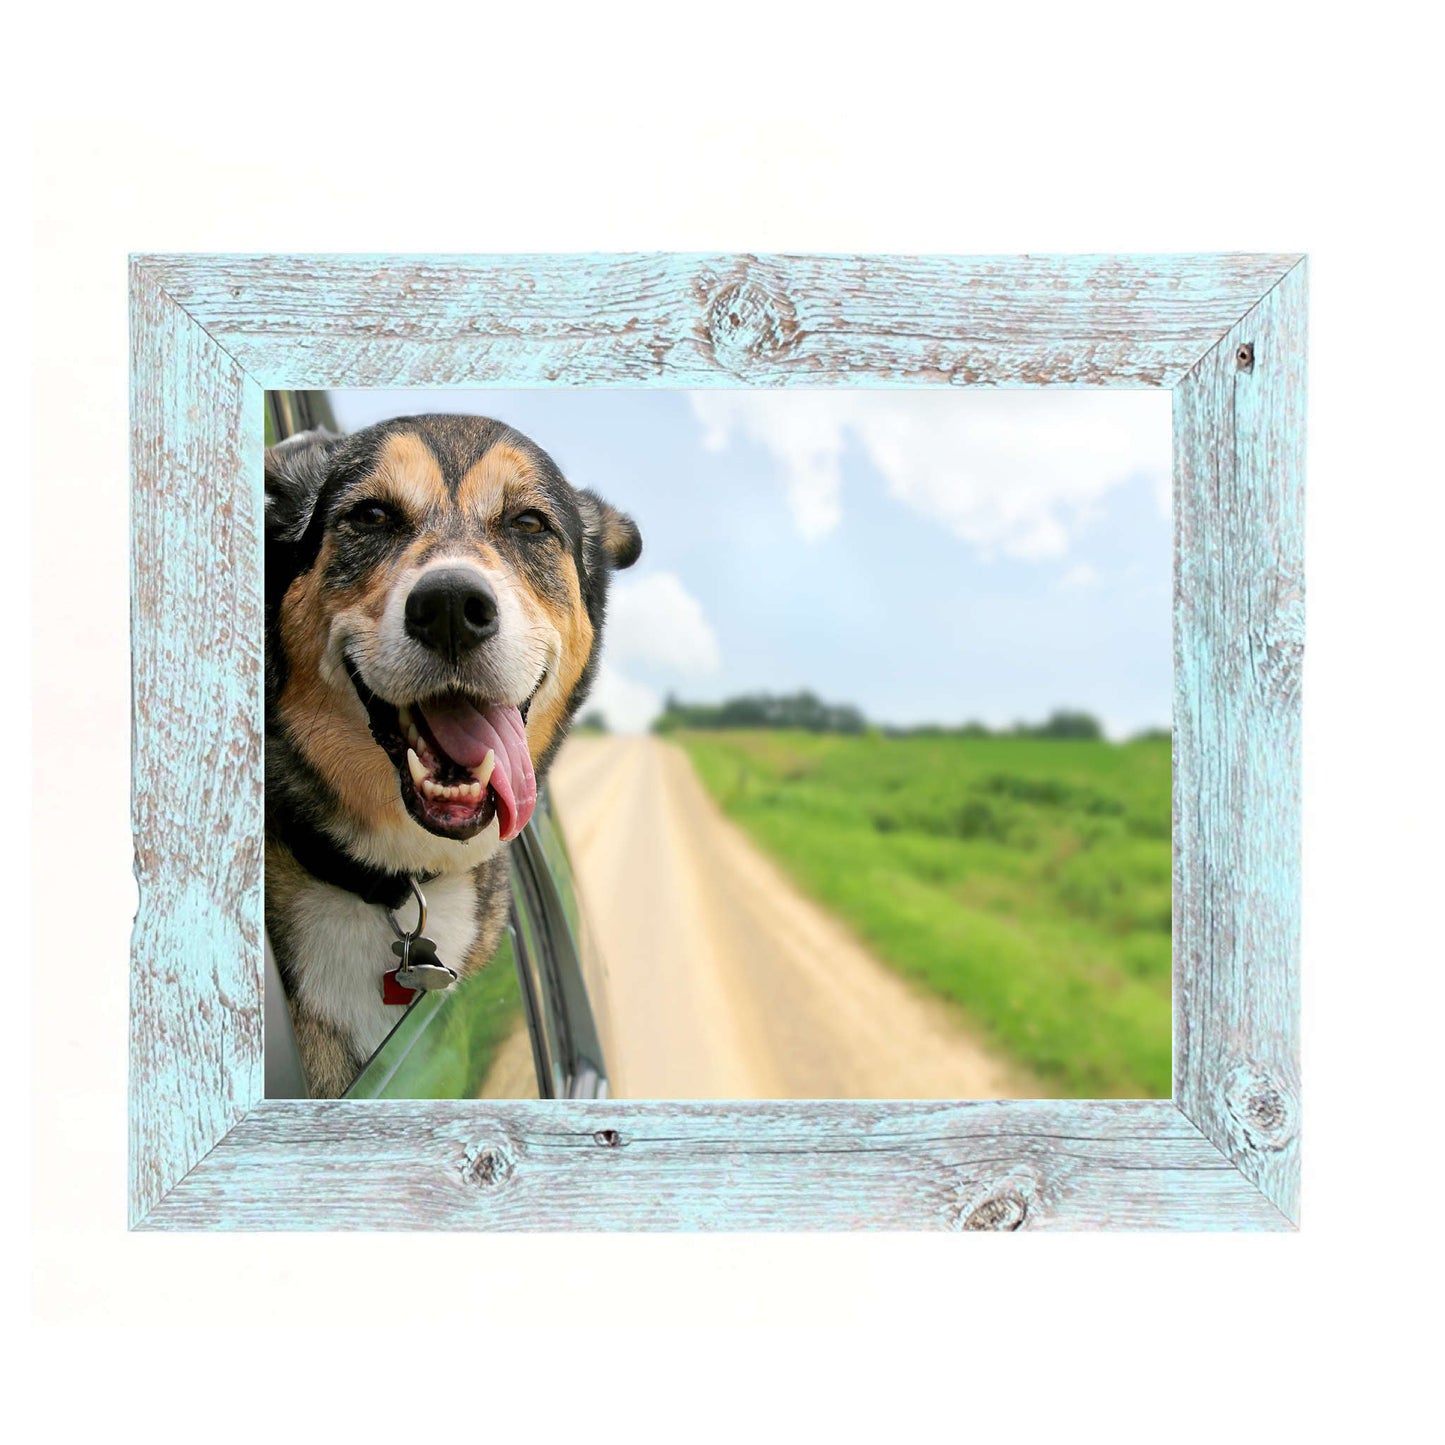 11"X11" Rustic Blue Picture Frame